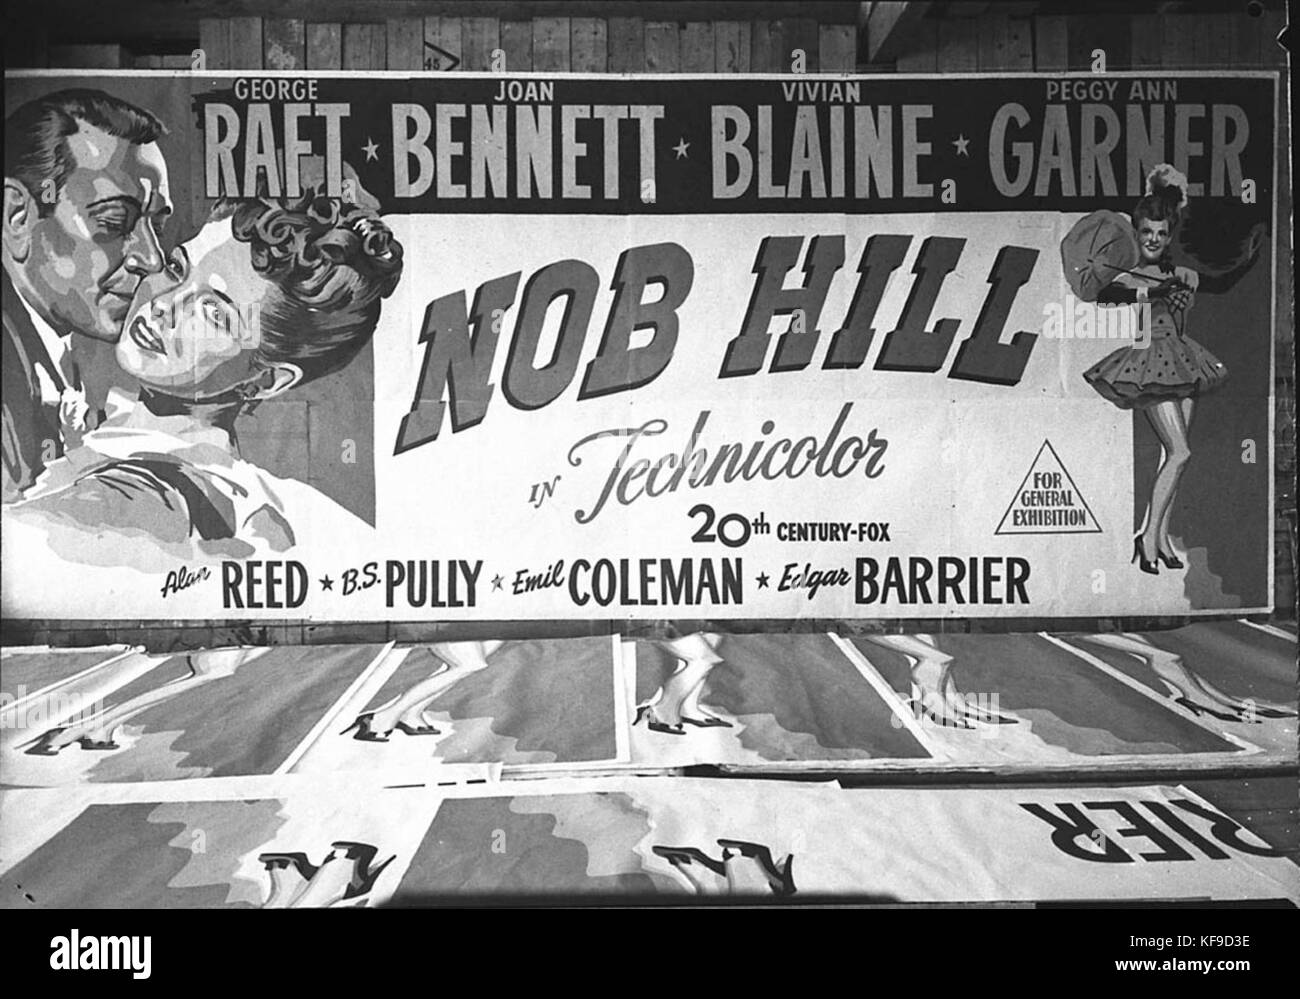 13495 Nob Hill poster with George Raft Joan Bennett Vivian Blaine Peggy Ann  Garner Alan Reed BS Pully Emil Coleman and Edgar Barrier British Empire  Films and Fox Films Stock Photo - Alamy